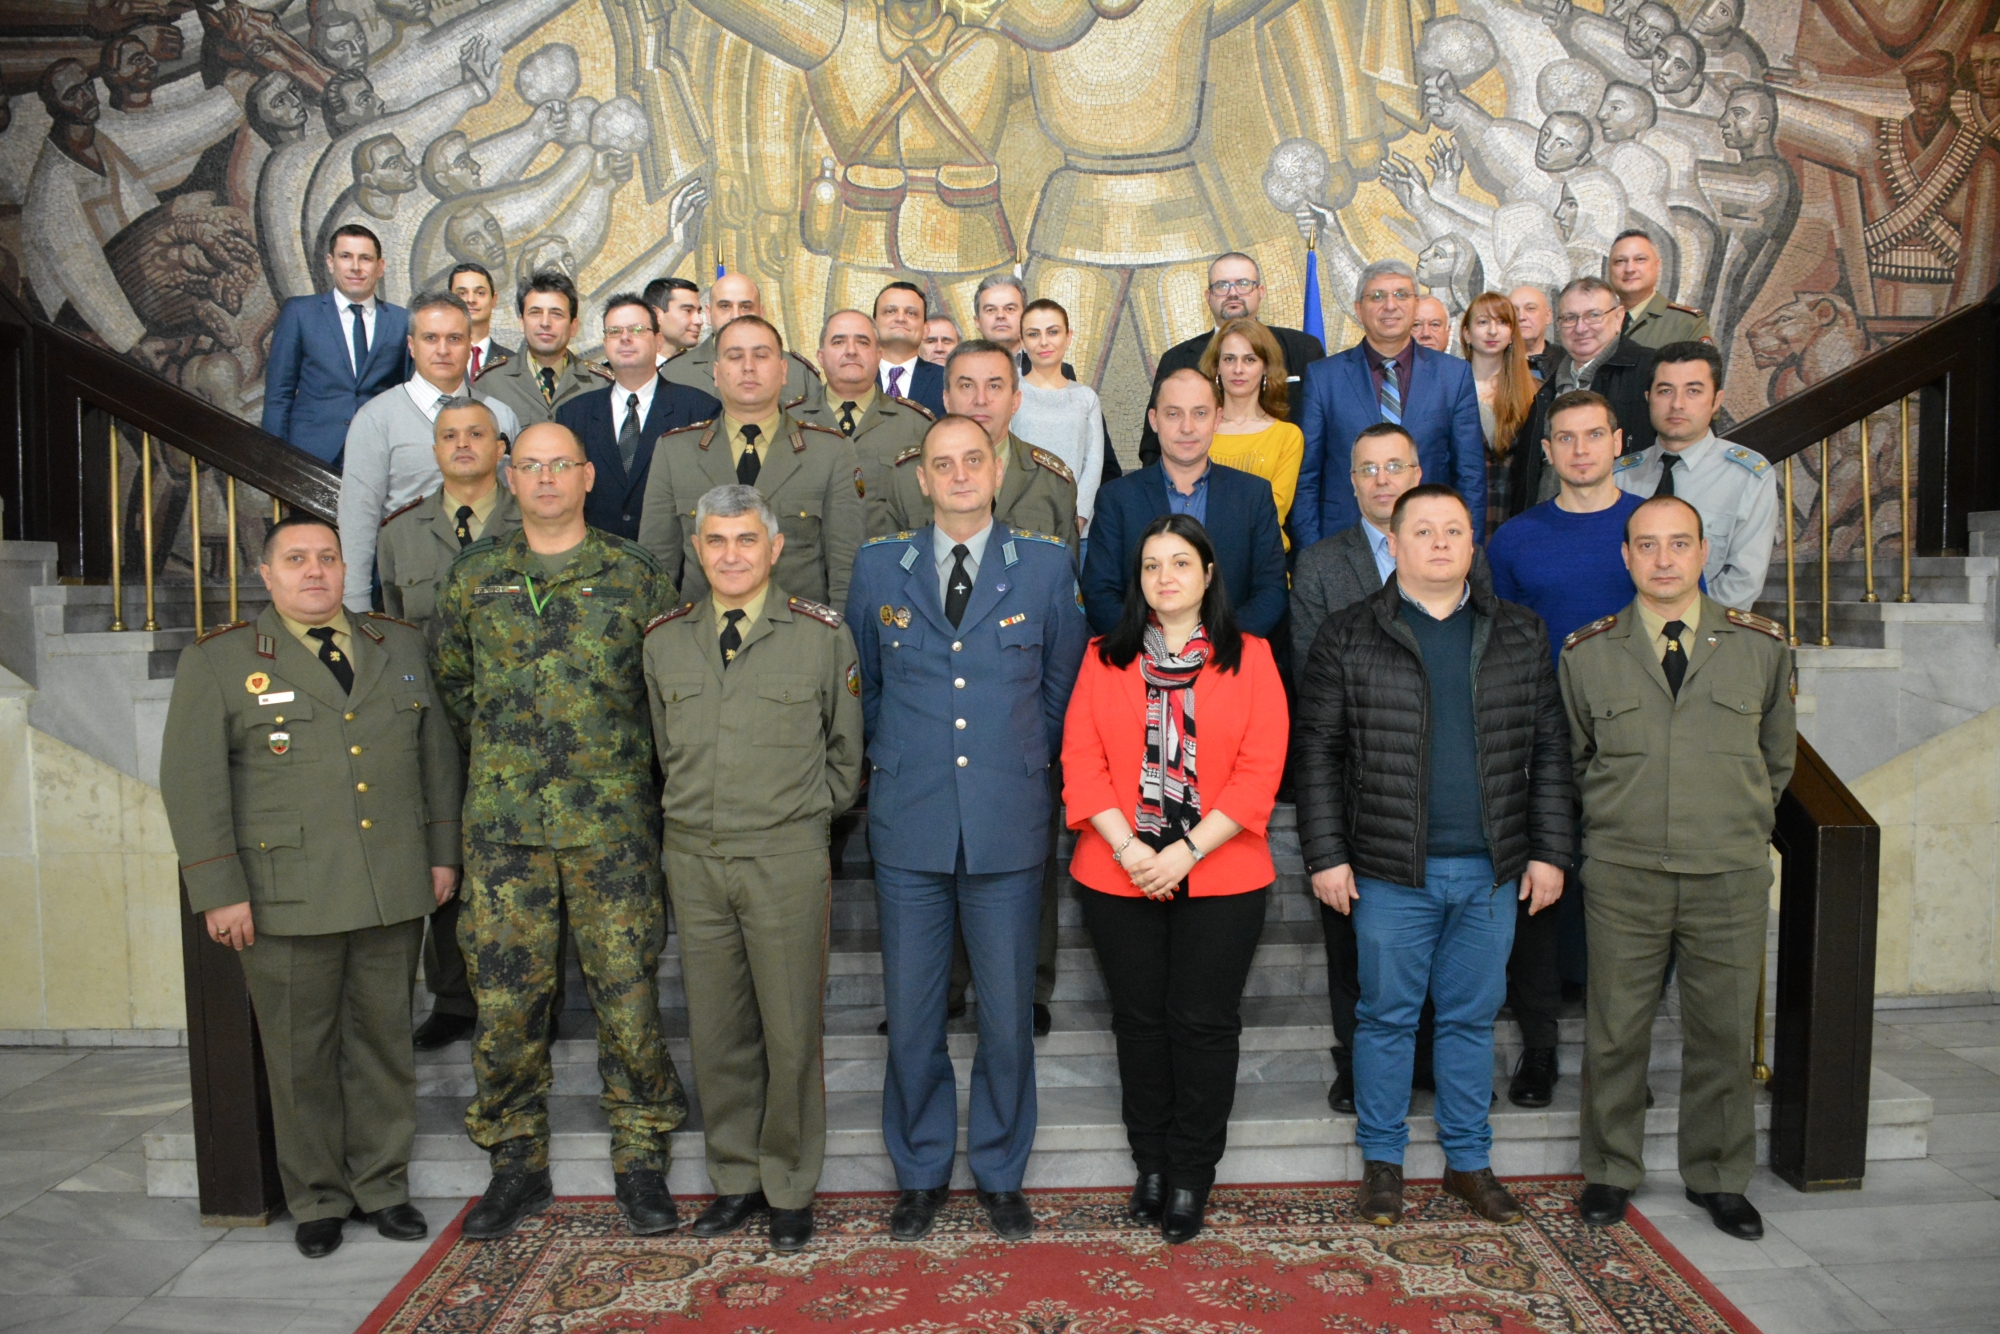 NATO Crisis Response System Course marked first 2019 CMDR COE educational event